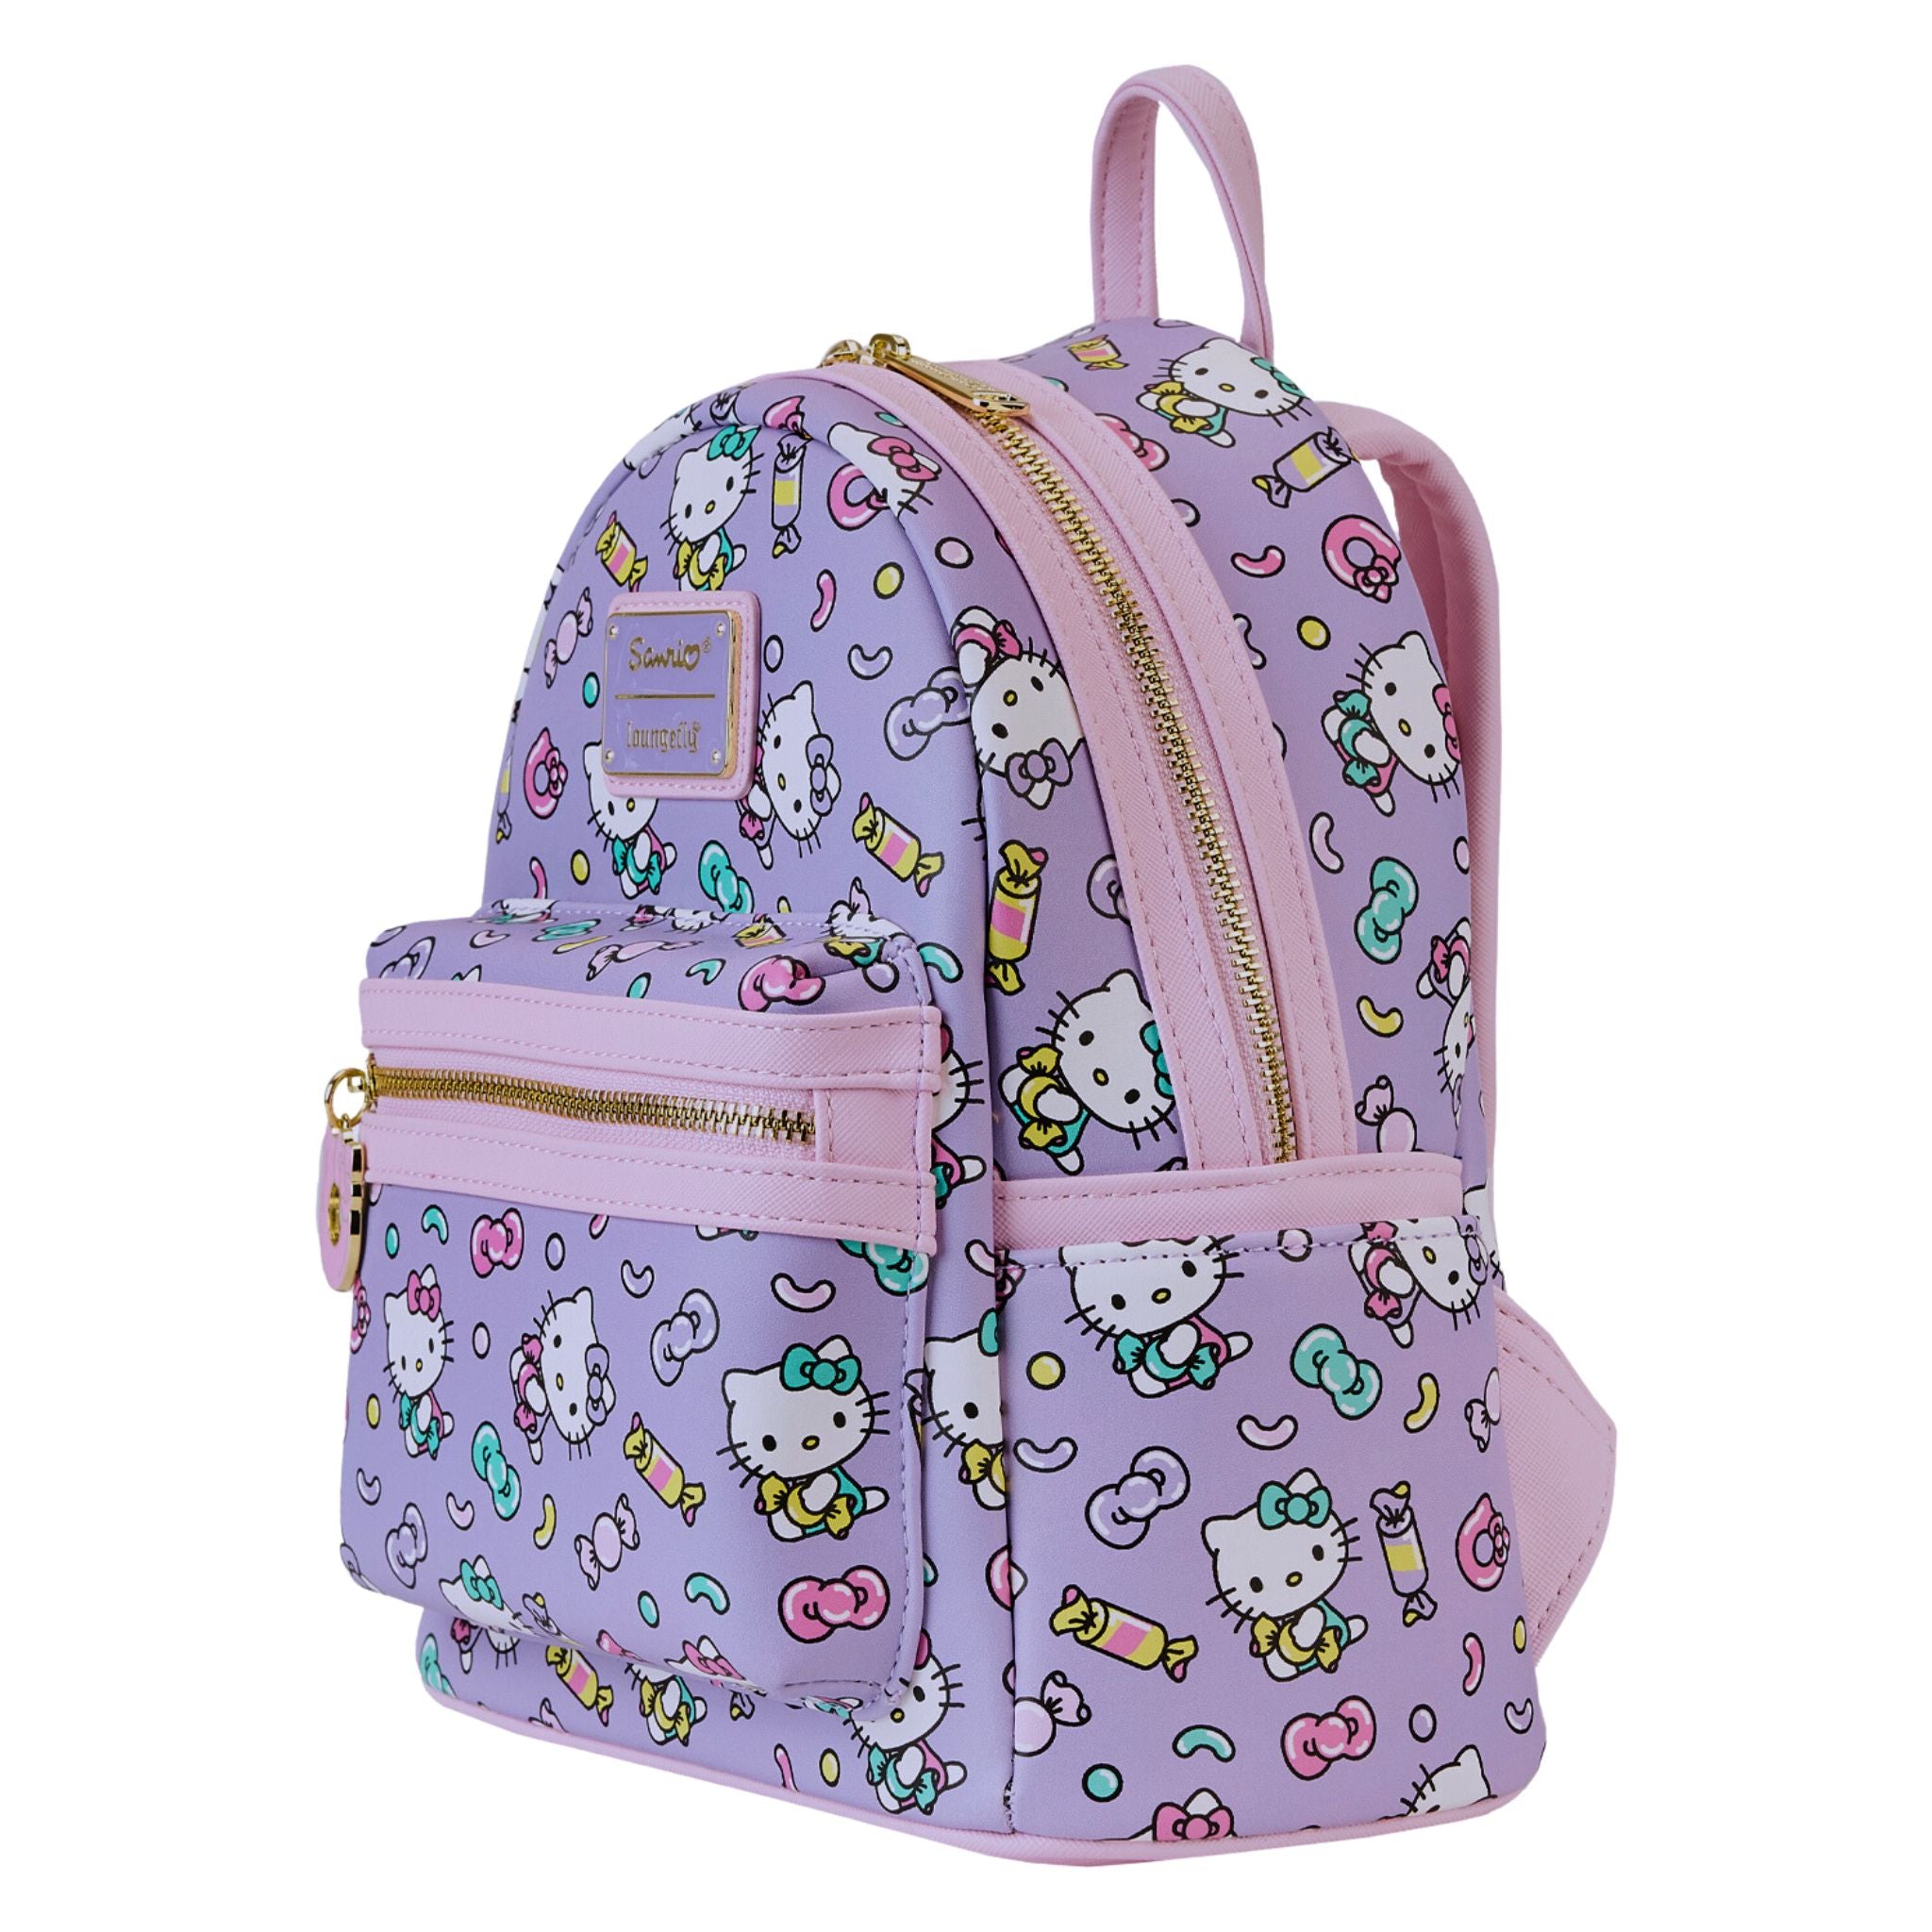 Sanrio Loungefly Loves Hello Kitty print backpack with bows & ears *Flawed